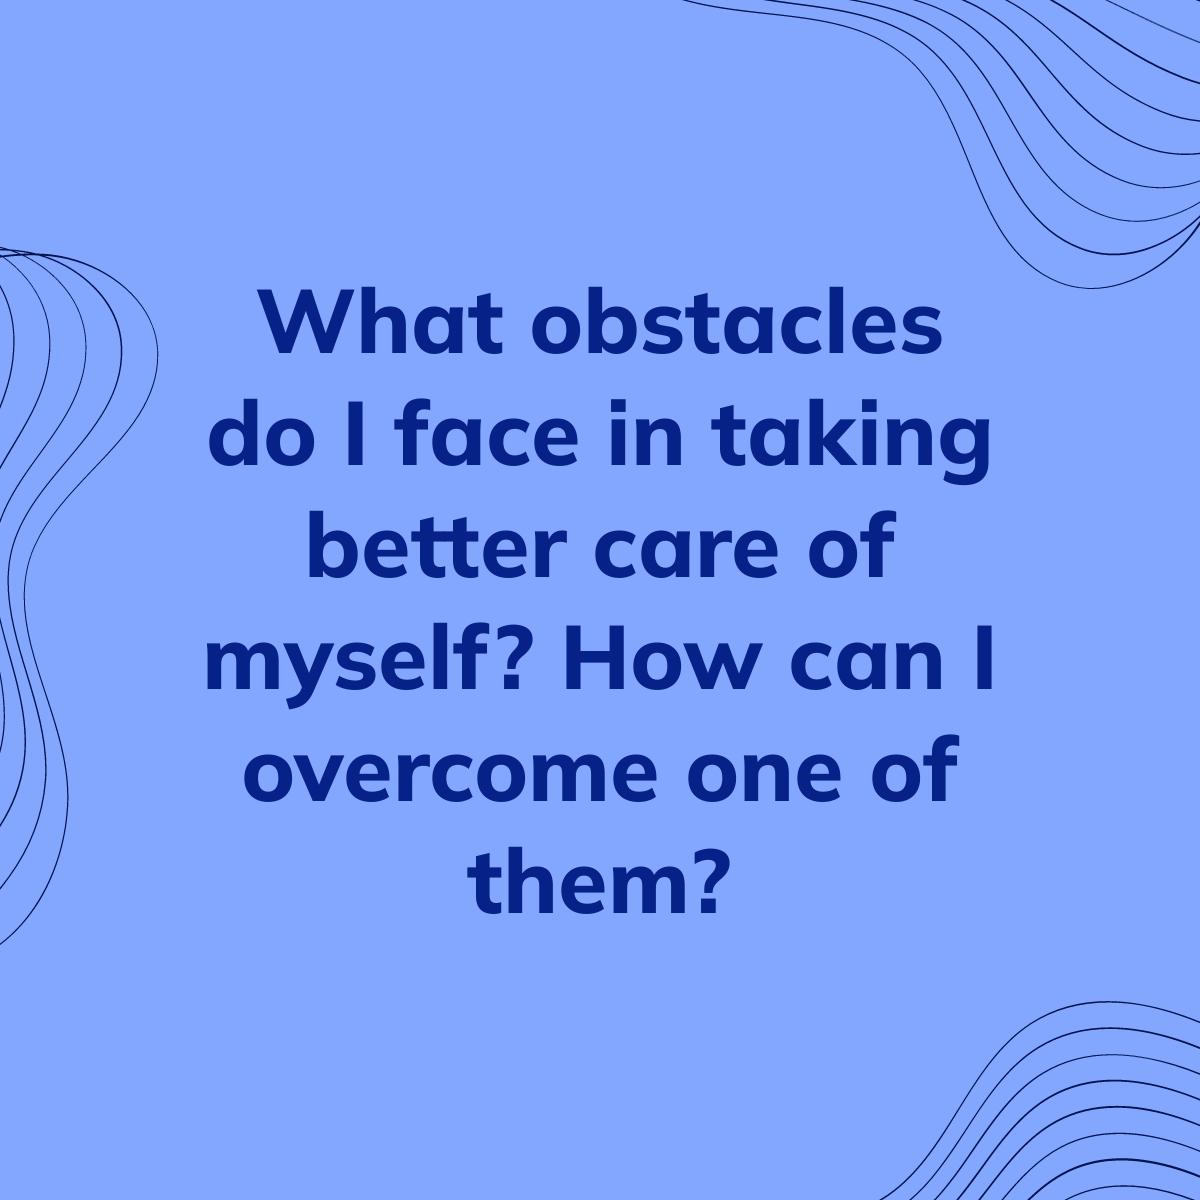 Journal Prompt: What obstacles do I face in taking better care of myself? How can I overcome one of them?